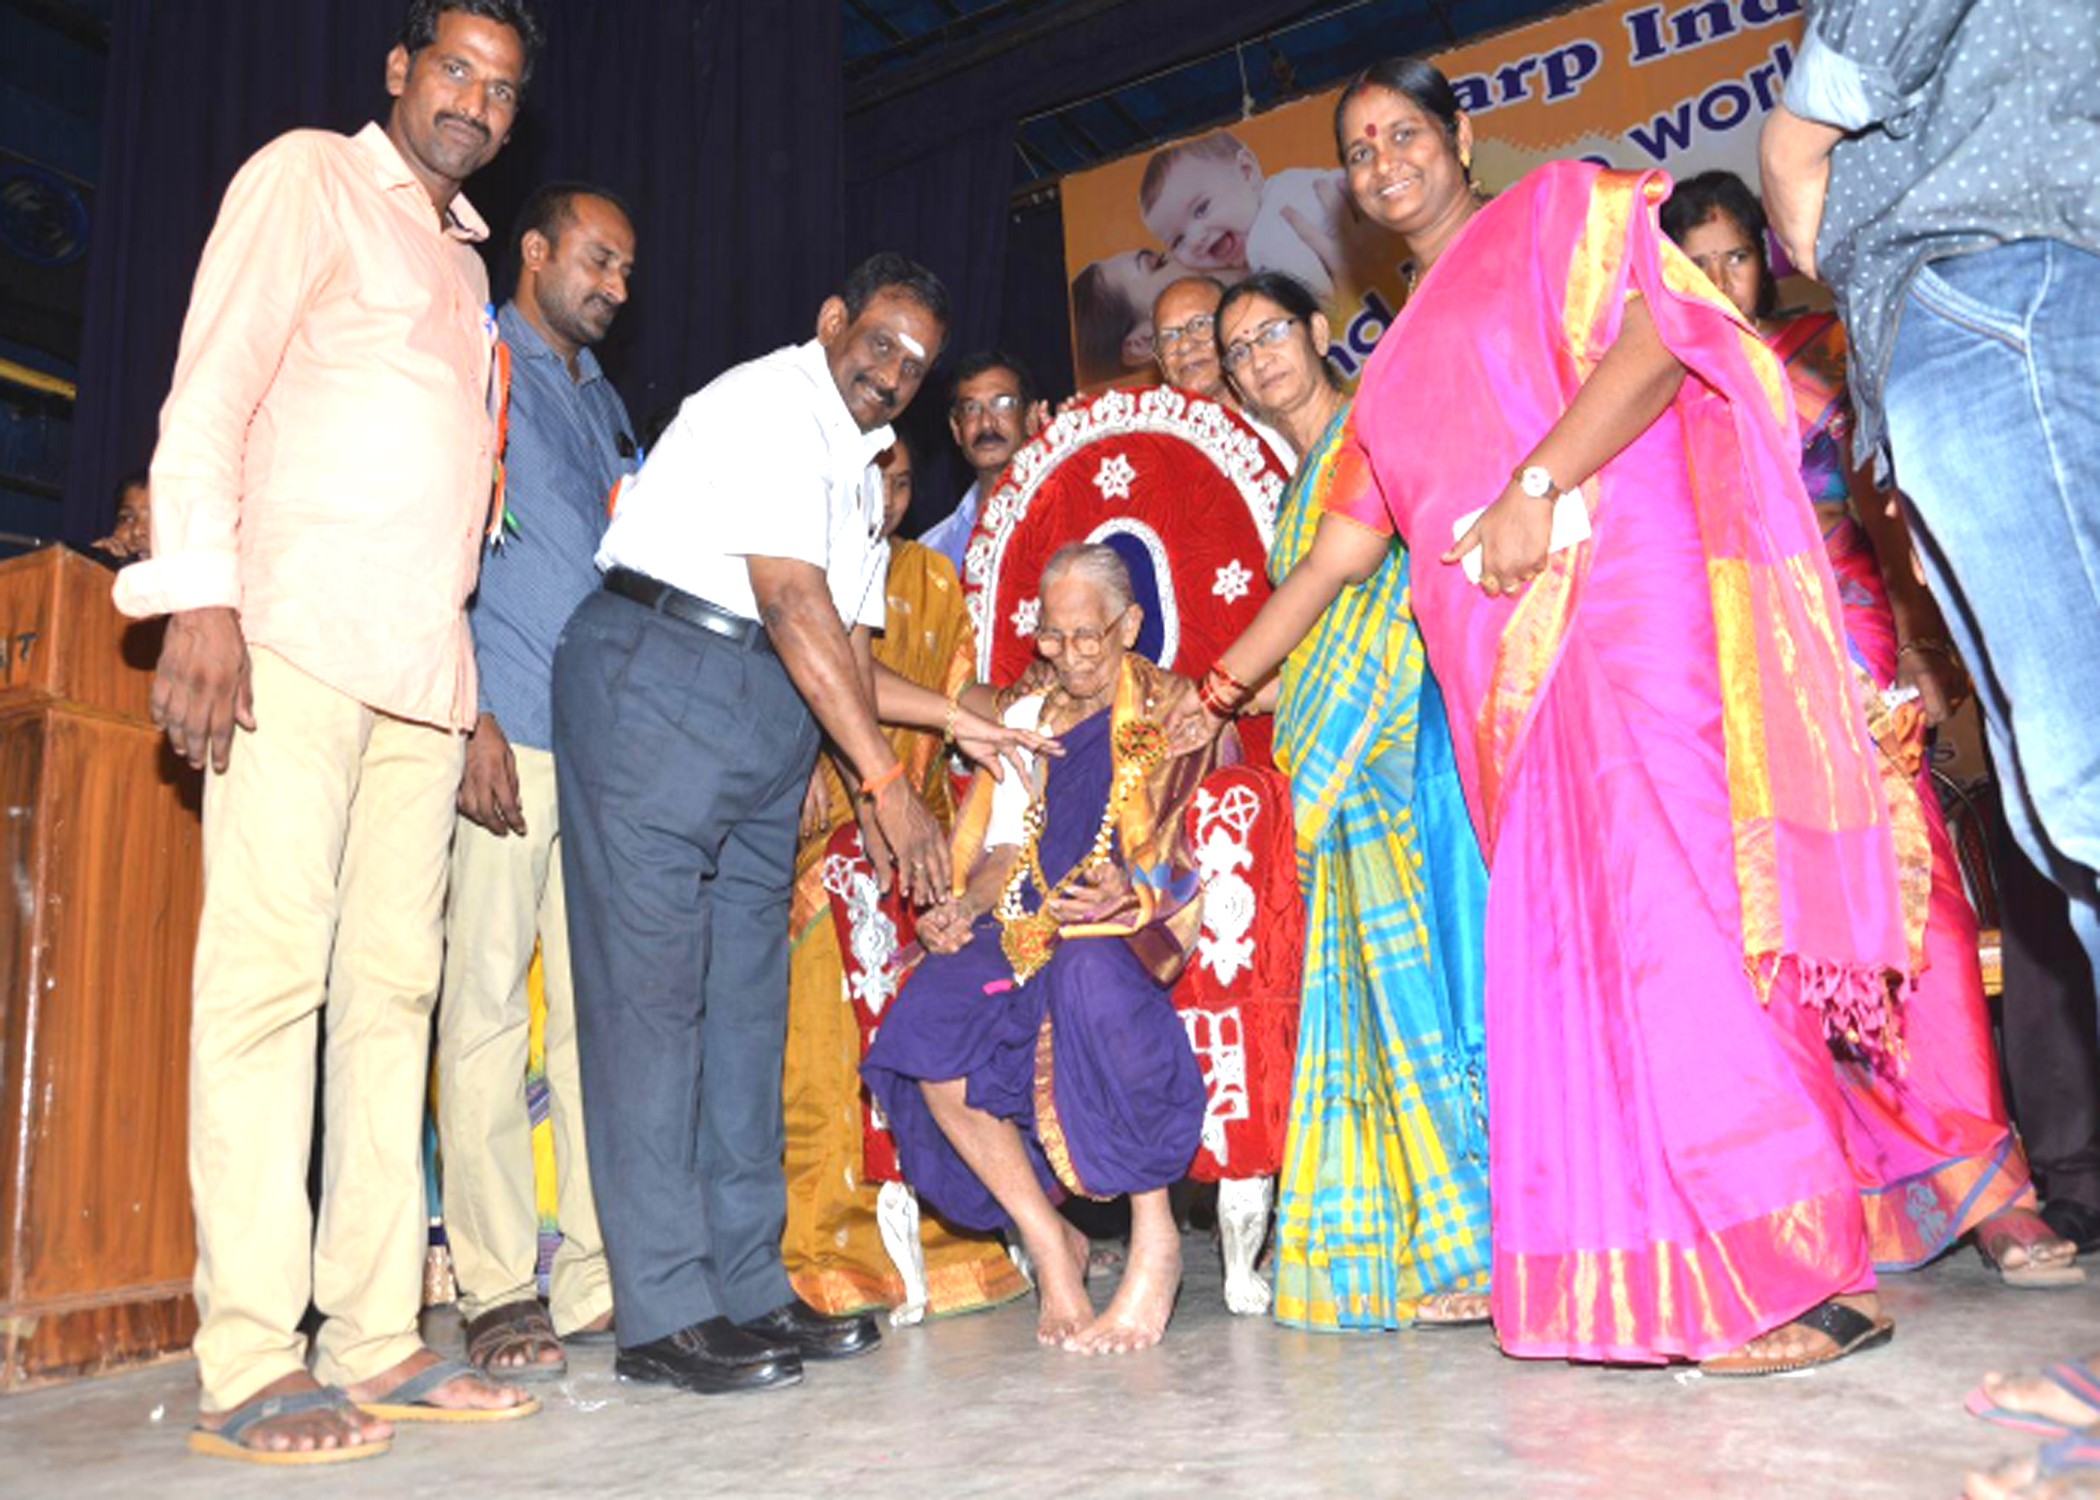 MOTHERS DAY EVENT CELEBRATED WITH 1116 MOTHERS IN SINGLE VENUE